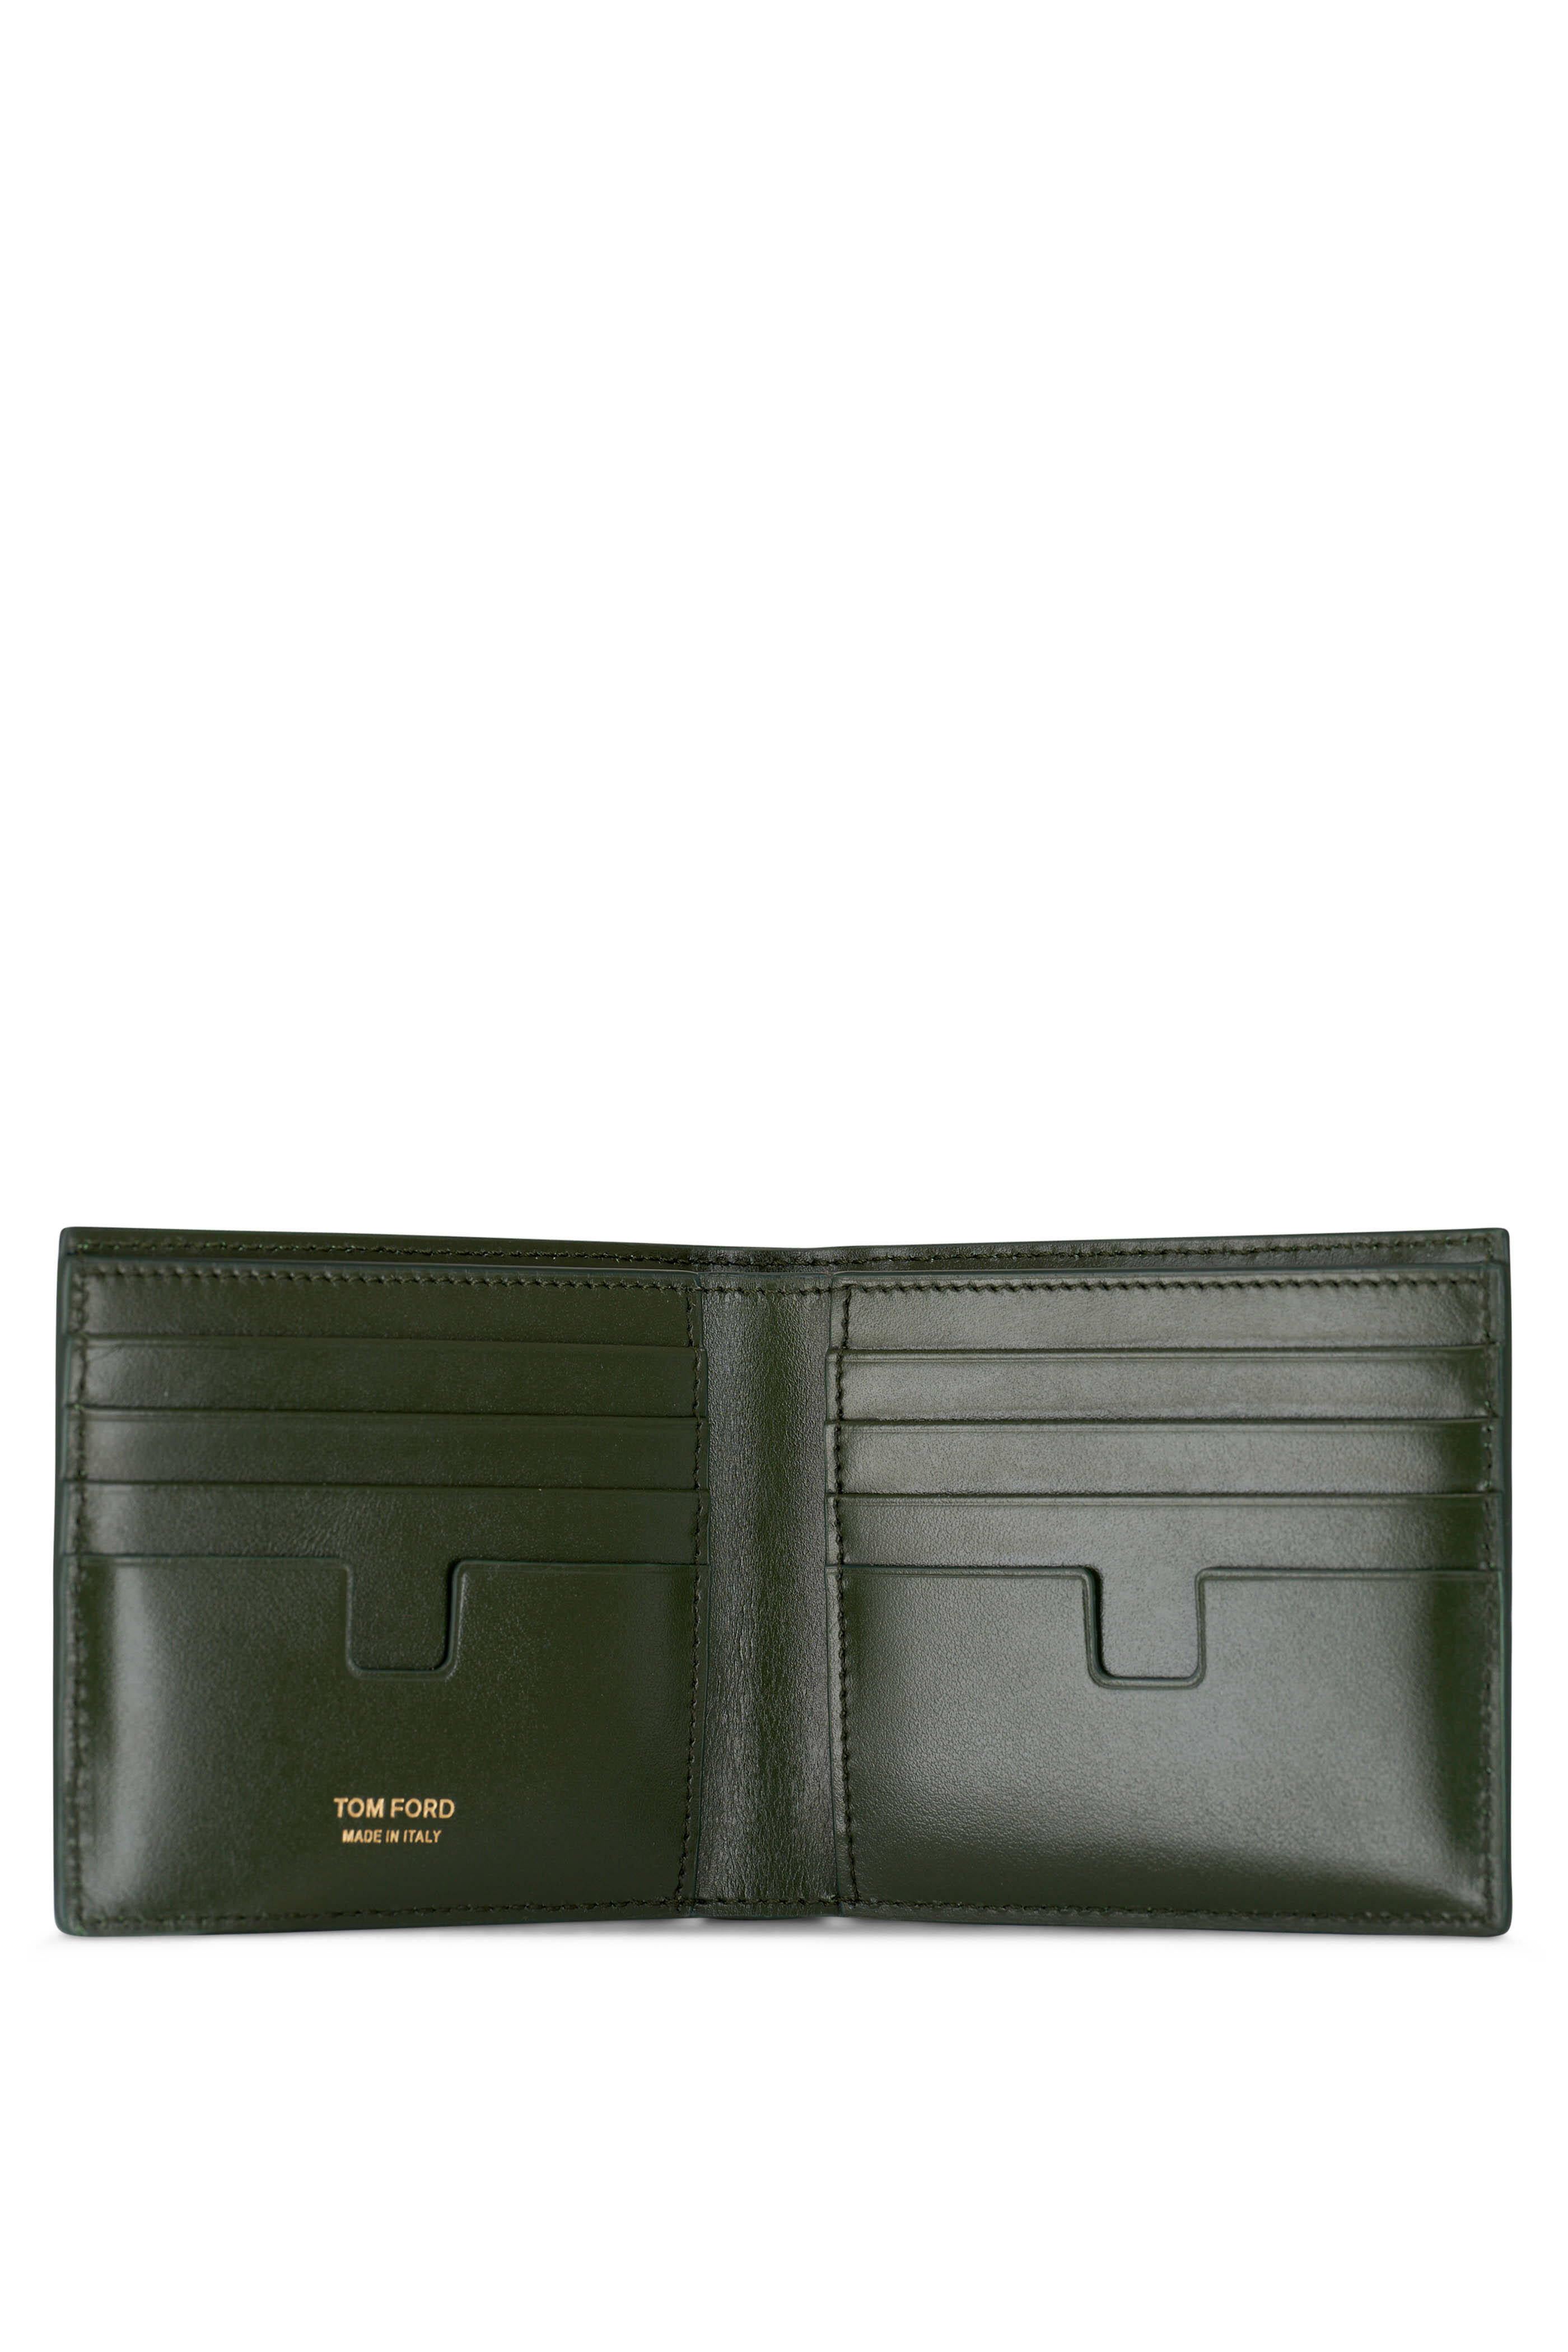 Tom Ford - Embossed Leather Money Clip Green Wallet